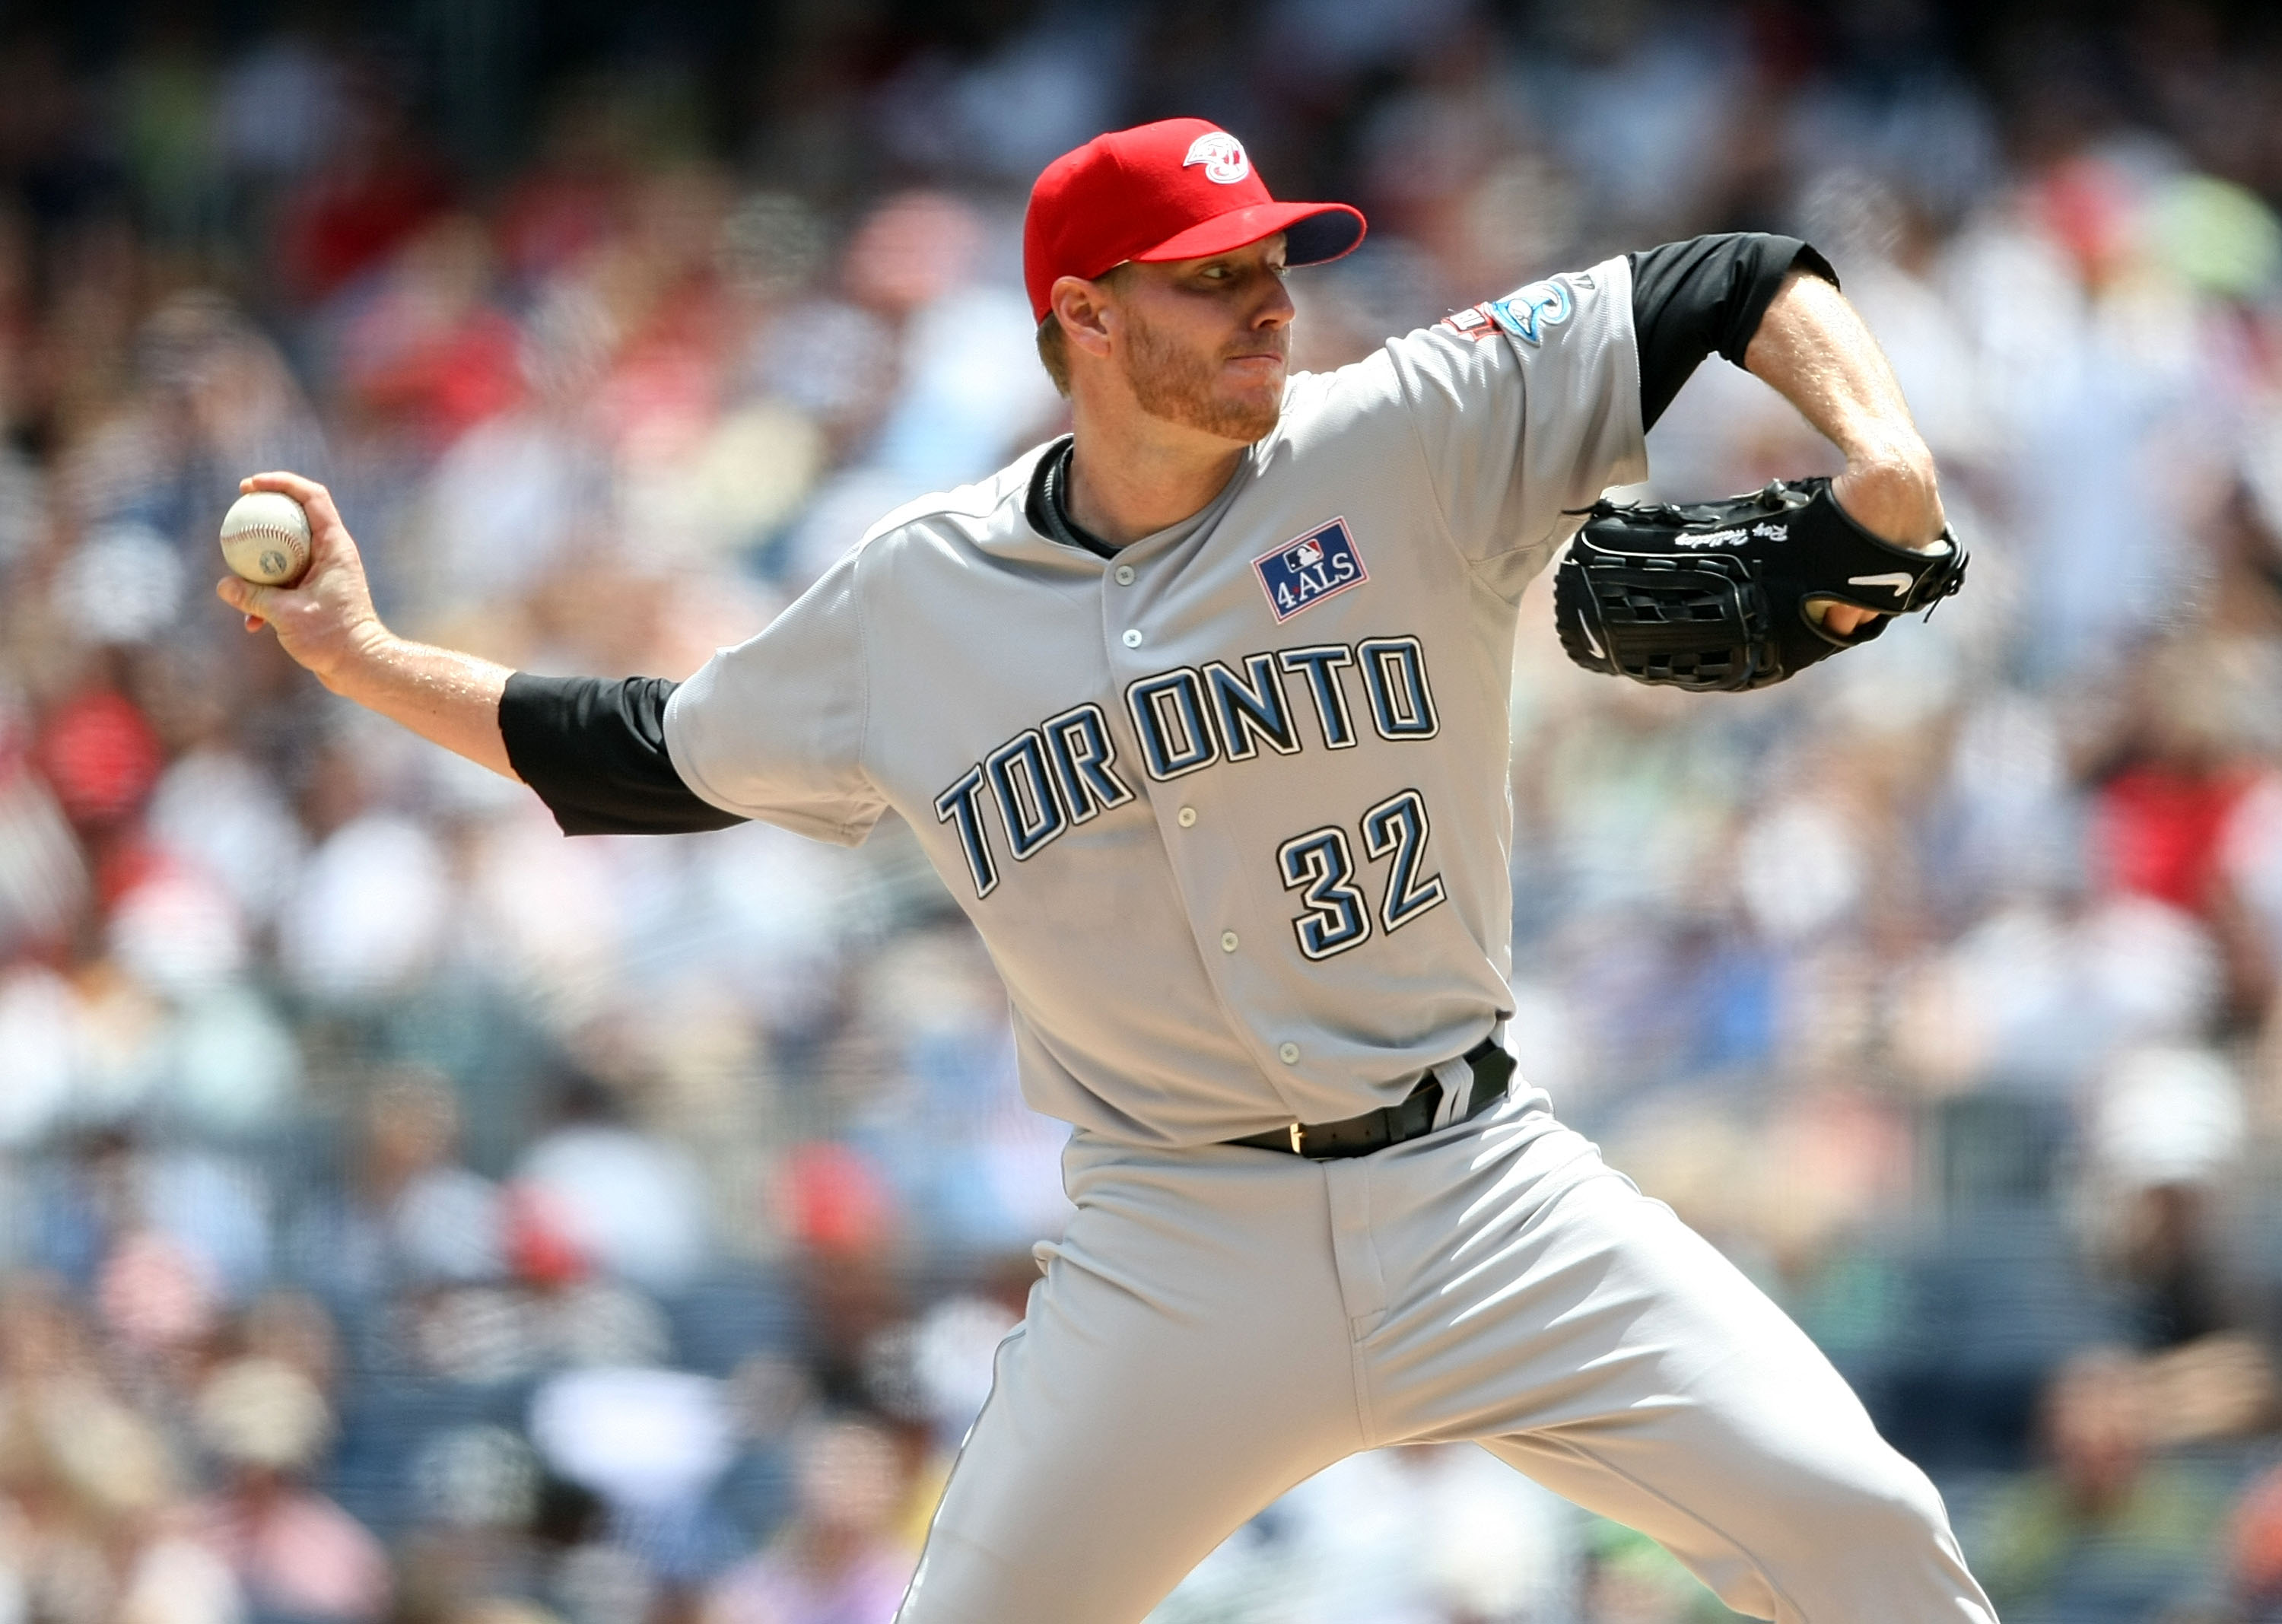 NEW YORK - JULY 04:  Roy Halladay #32 of the Toronto Blue Jays pitches against the New York Yankees on July 4, 2009 at Yankee Stadium in the Bronx borough of New York City.  (Photo by Nick Laham/Getty Images)